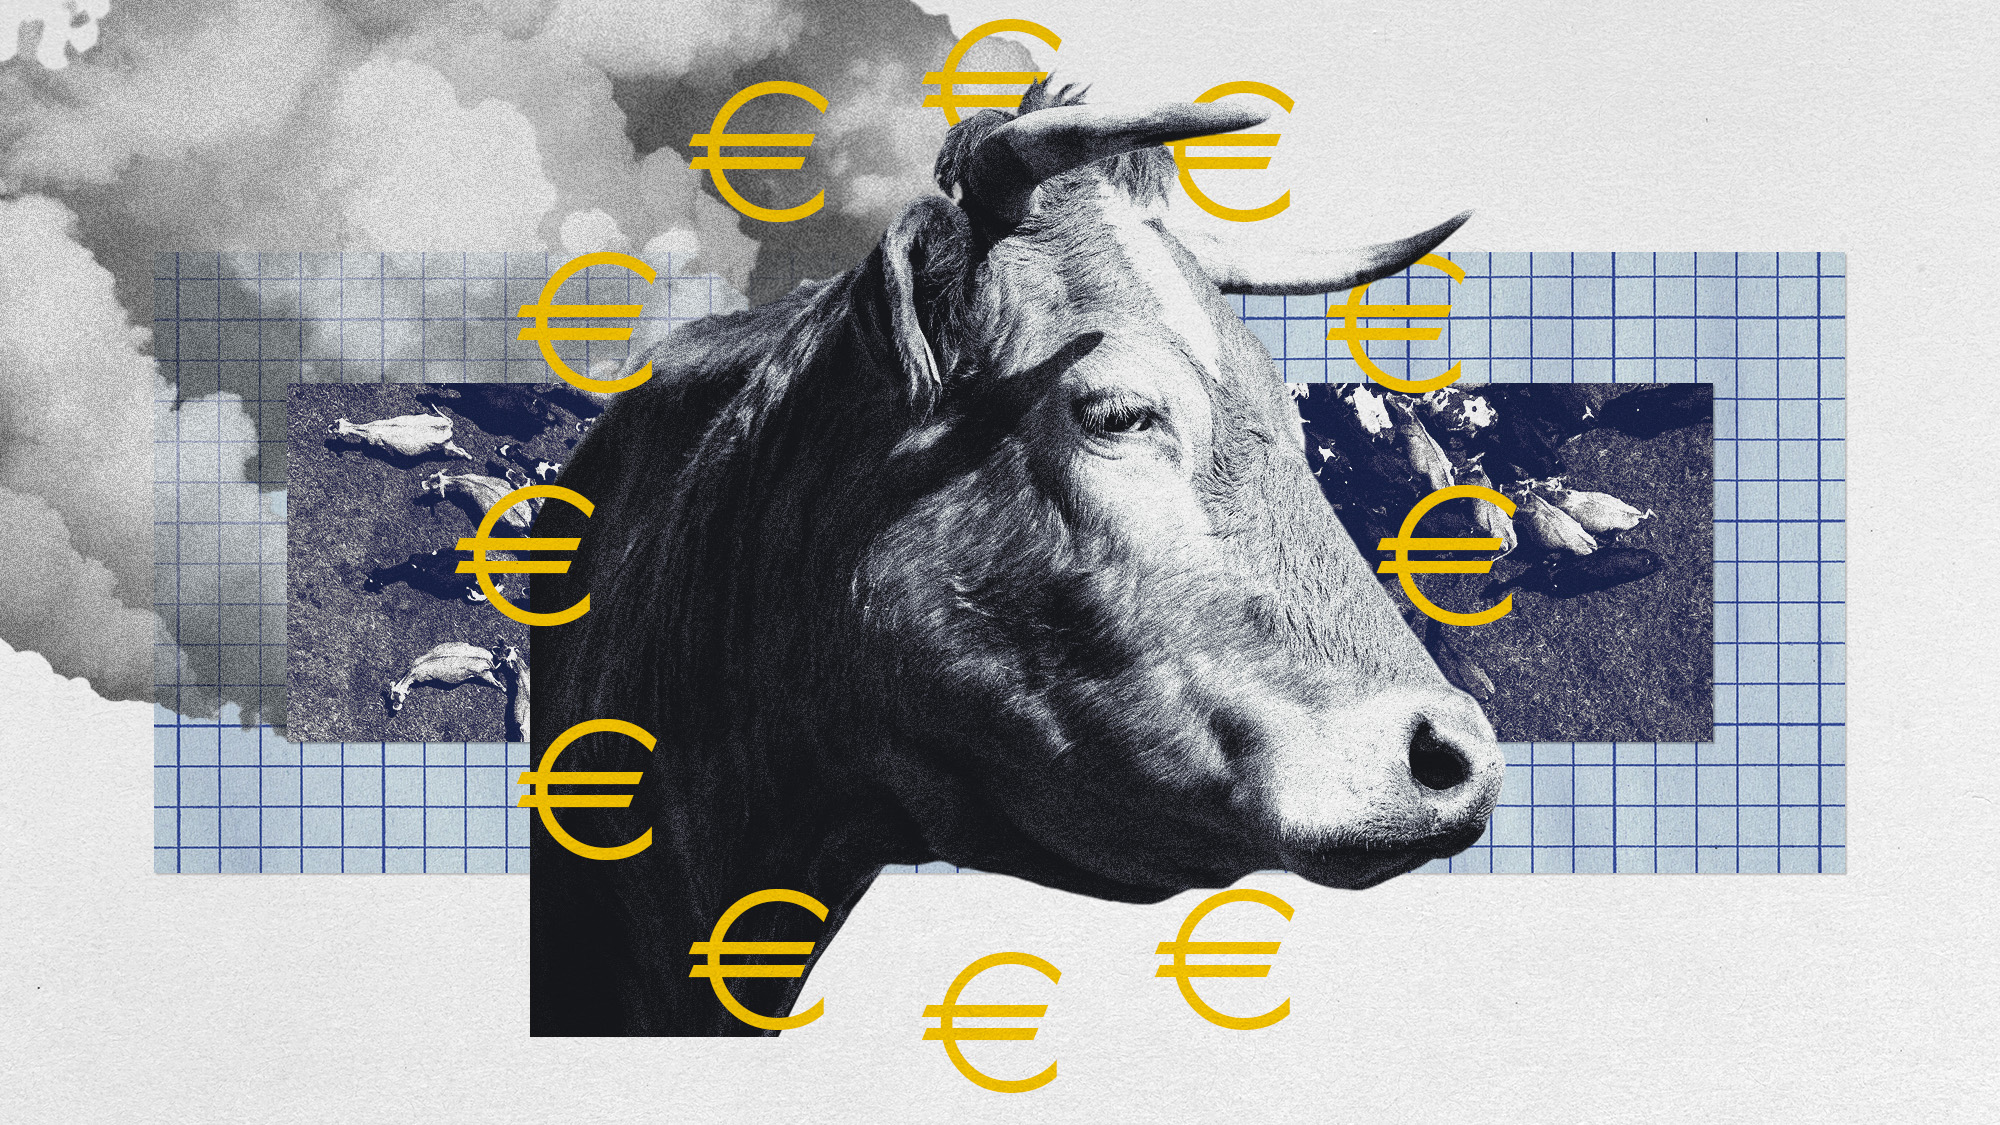  Gassy livestock are going to be taxed in Denmark 